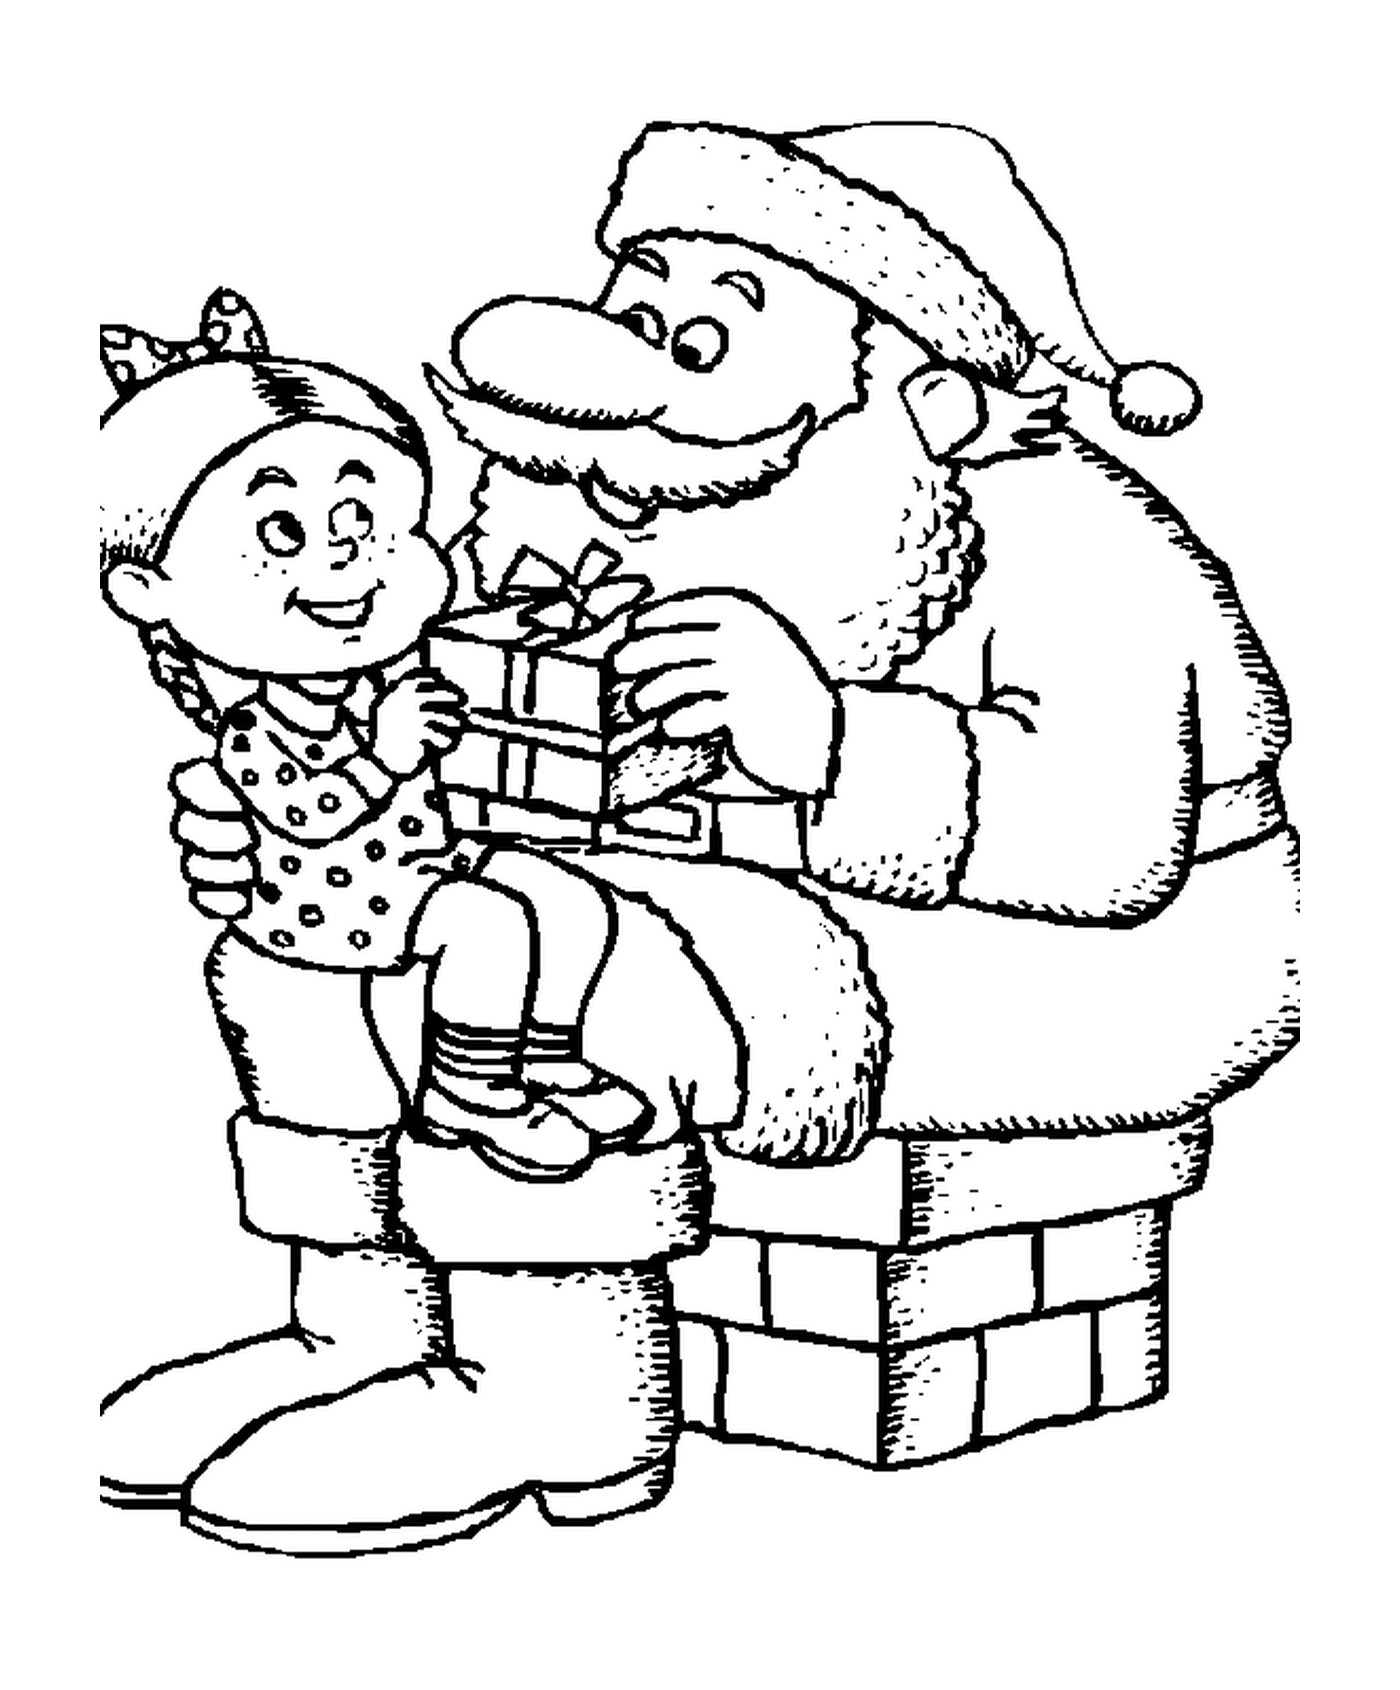  Santa Claus and little girl 